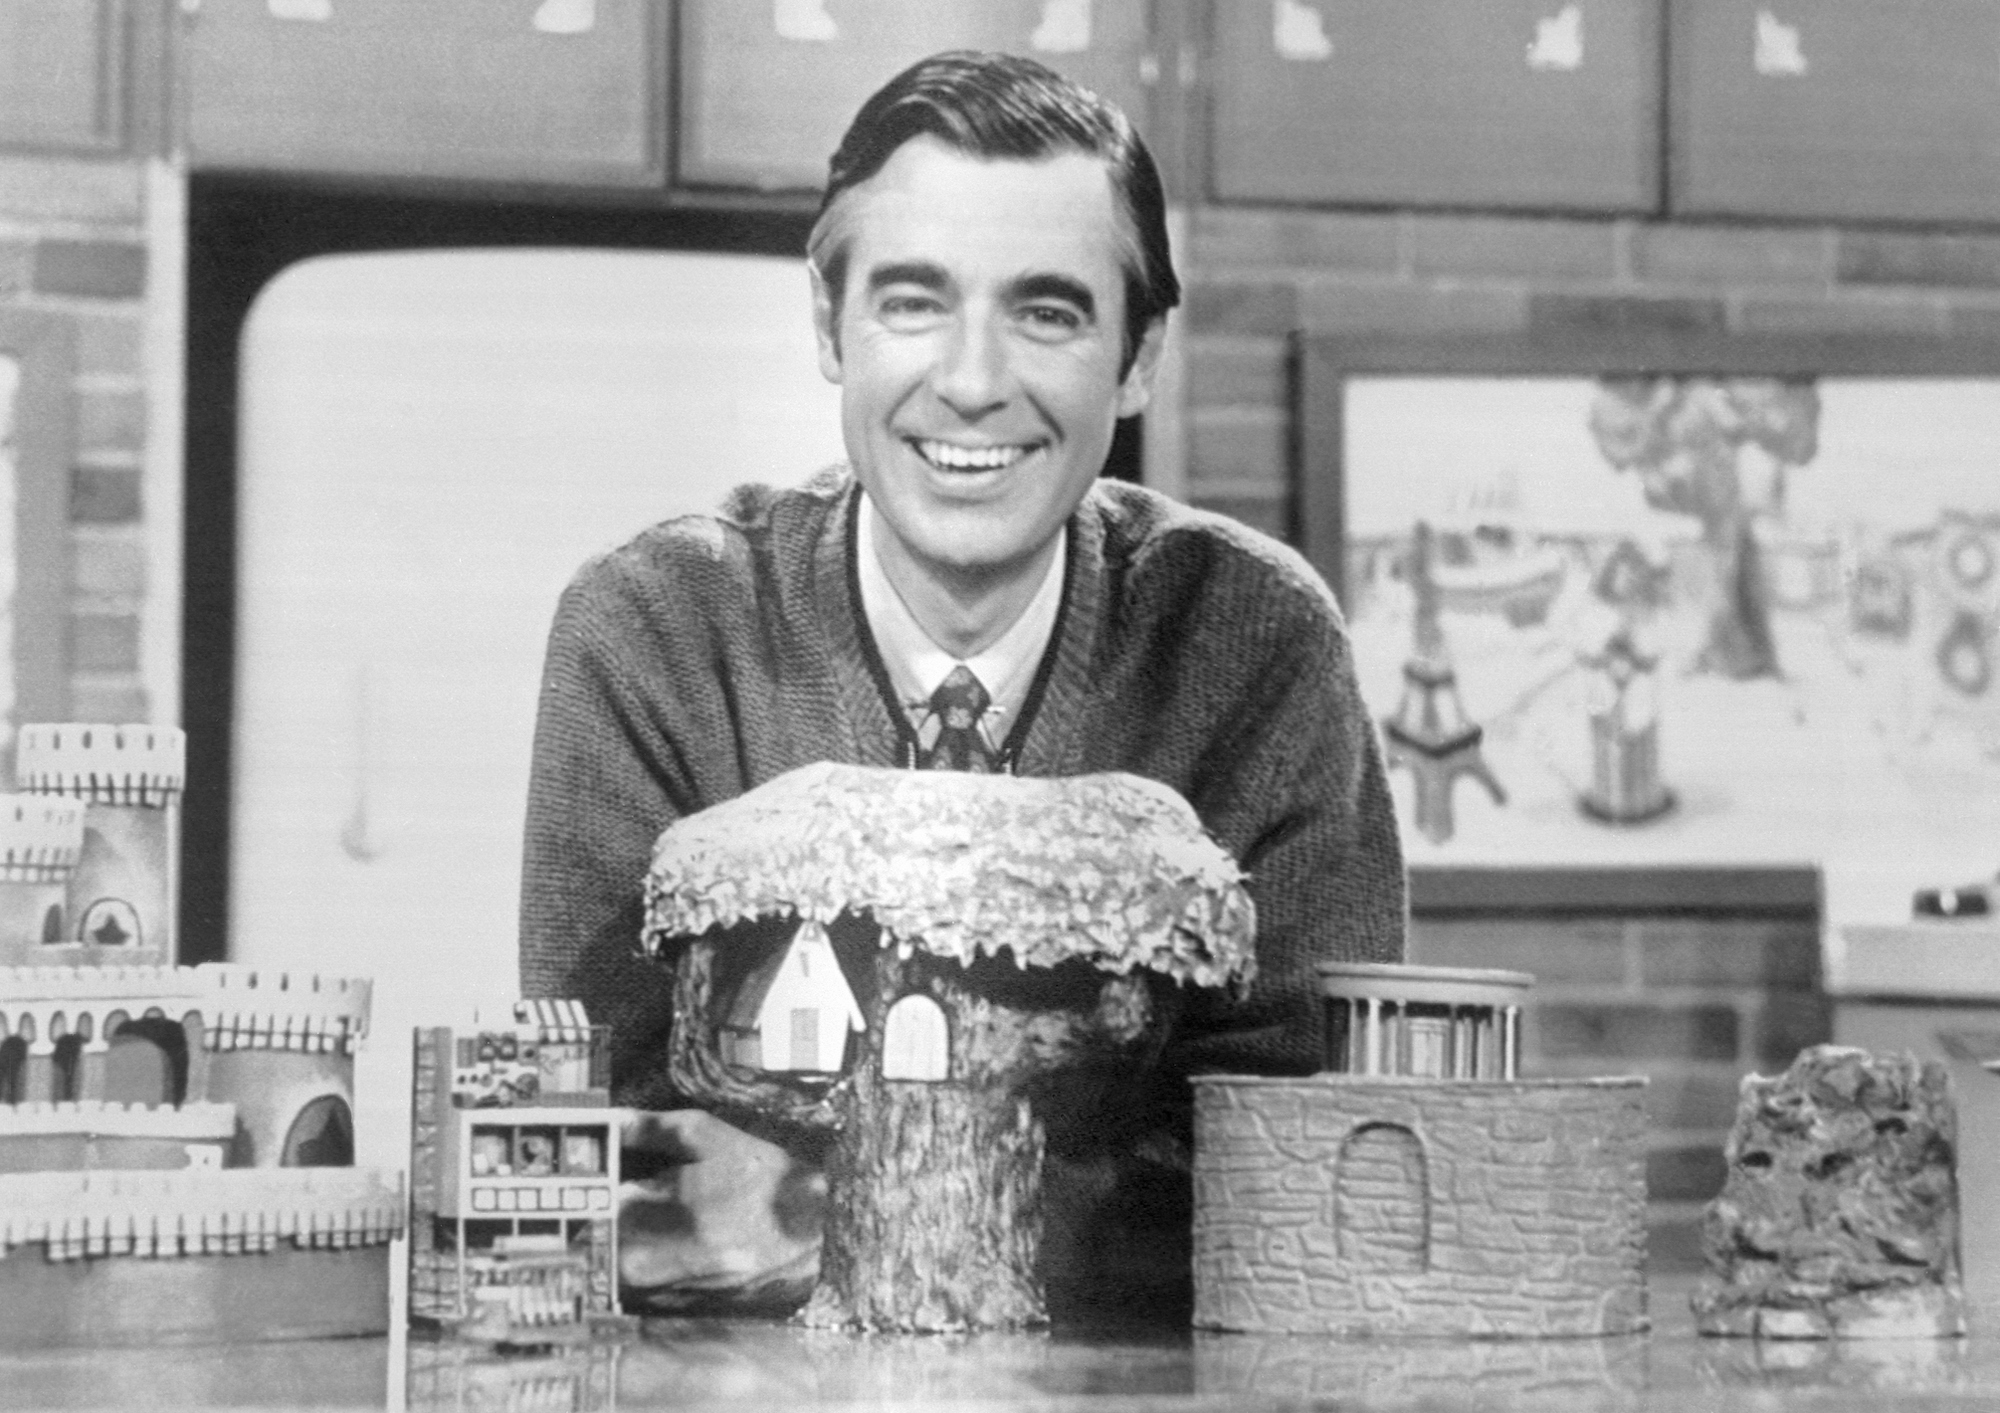 Fred Rogers smiling on 'Mister Rogers' Neighborhood'